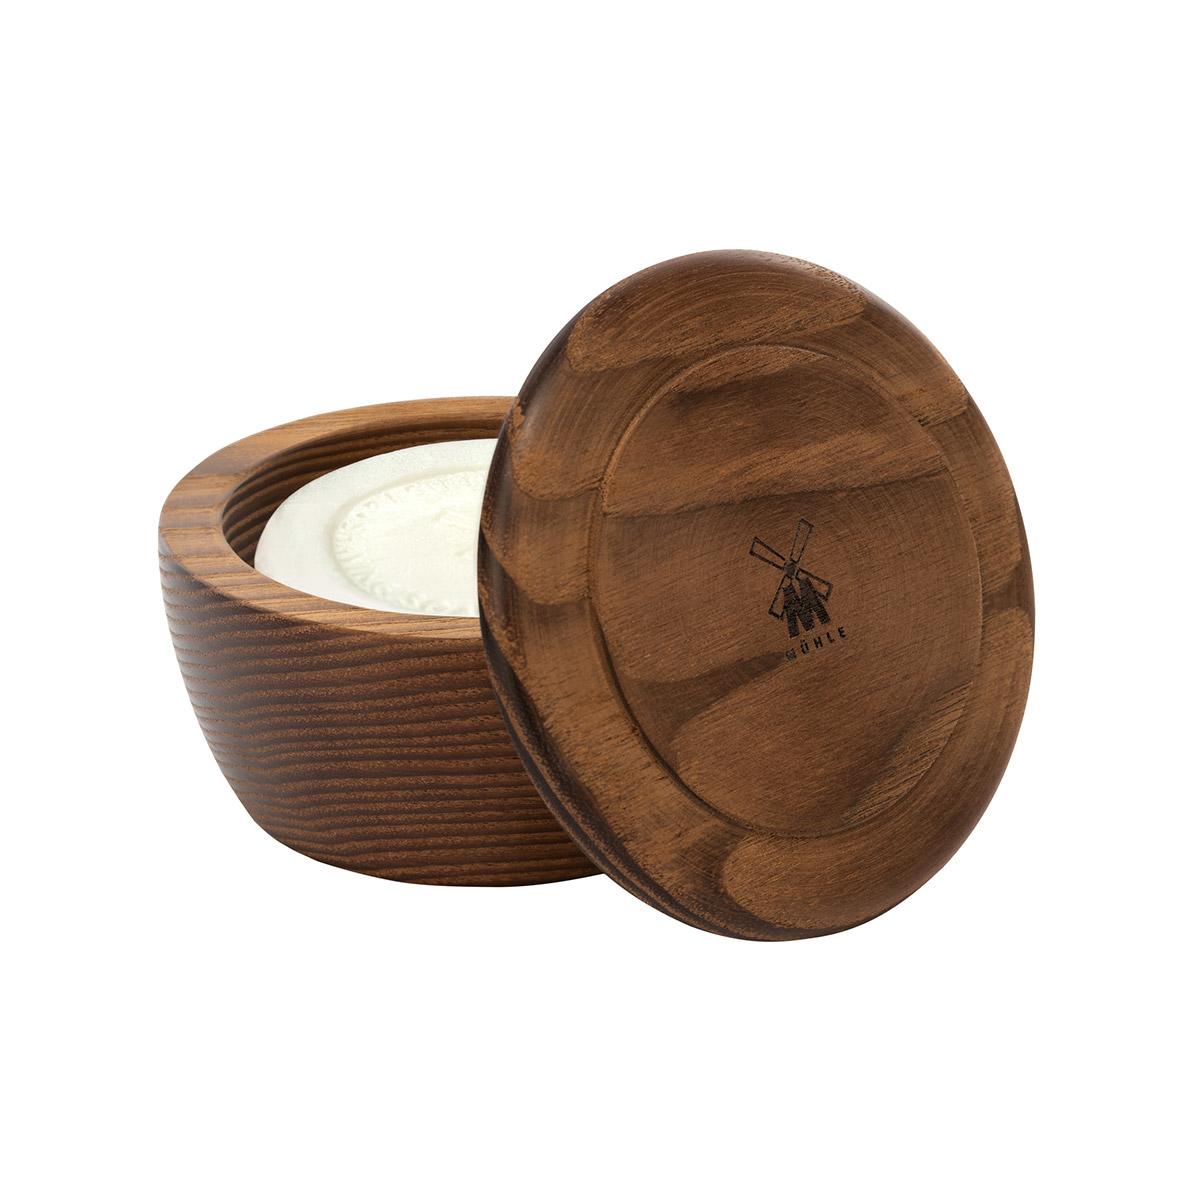 shaving soap and wooden bowl